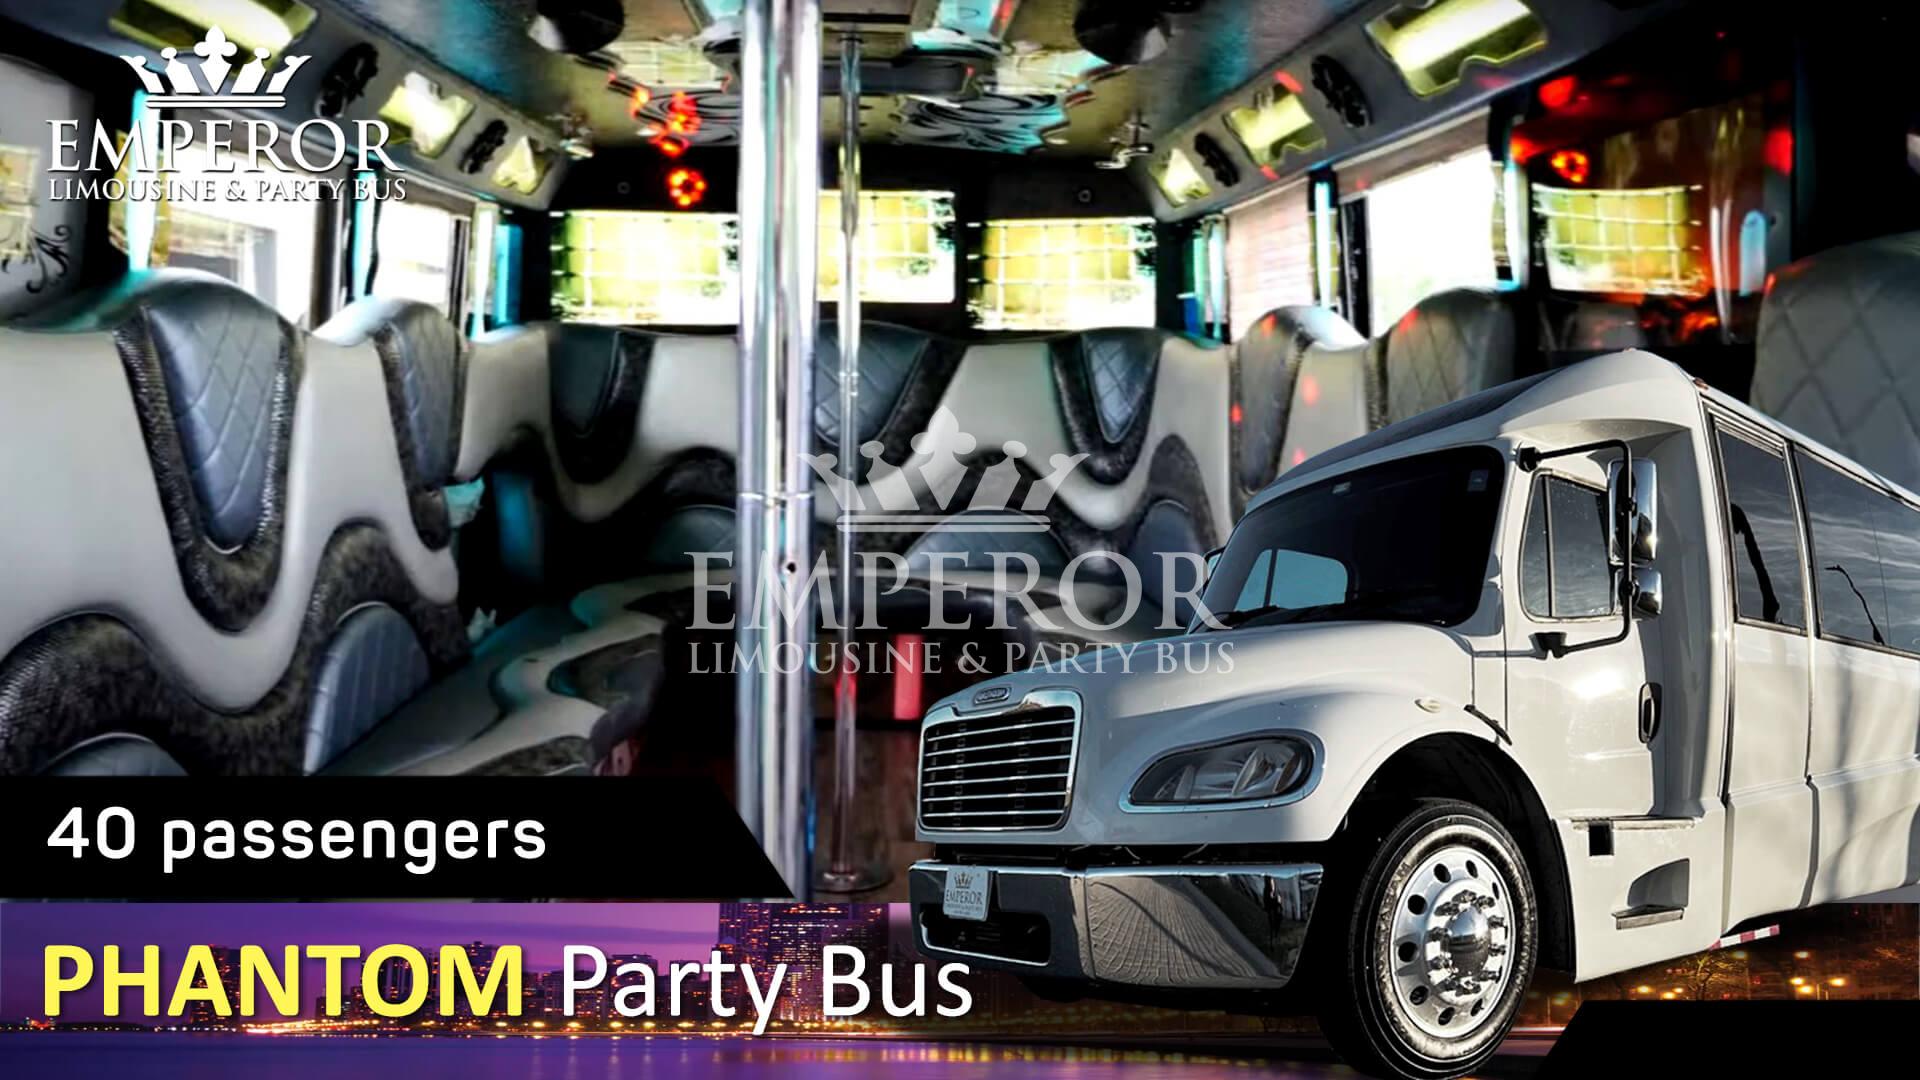 Bachelor Party bus rental in Chicago - Phantom Edition